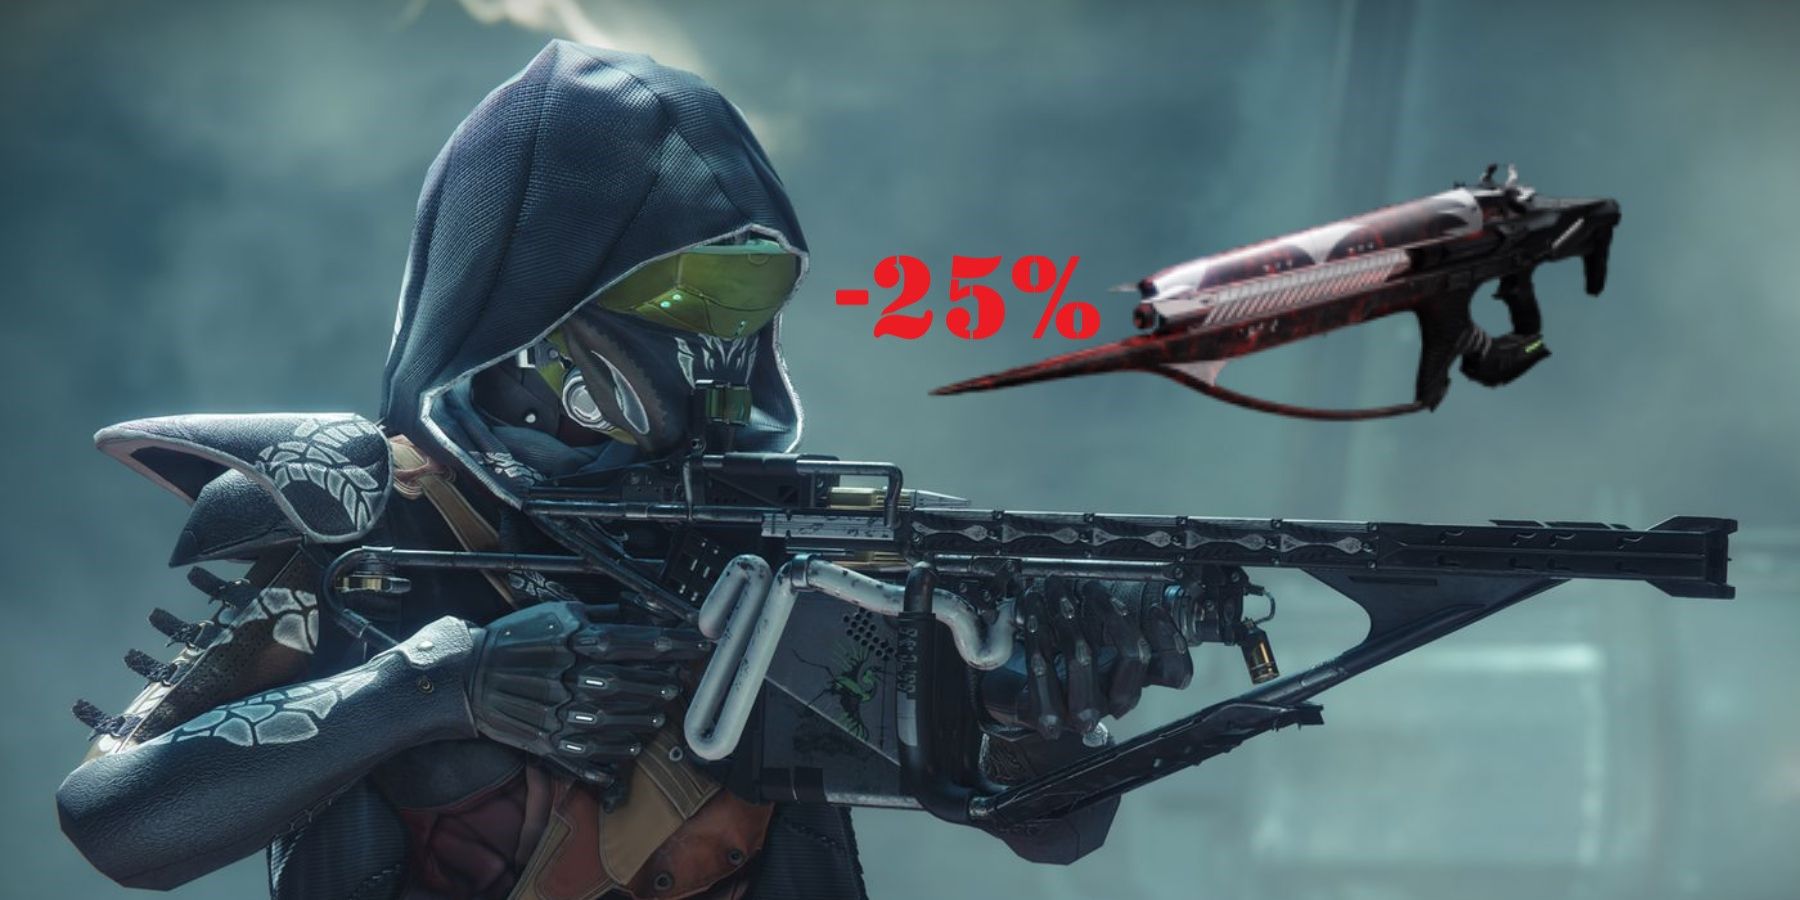 2 Arbalest Nerf Also Reduces Linear Fusion Rifles' Versus Champions